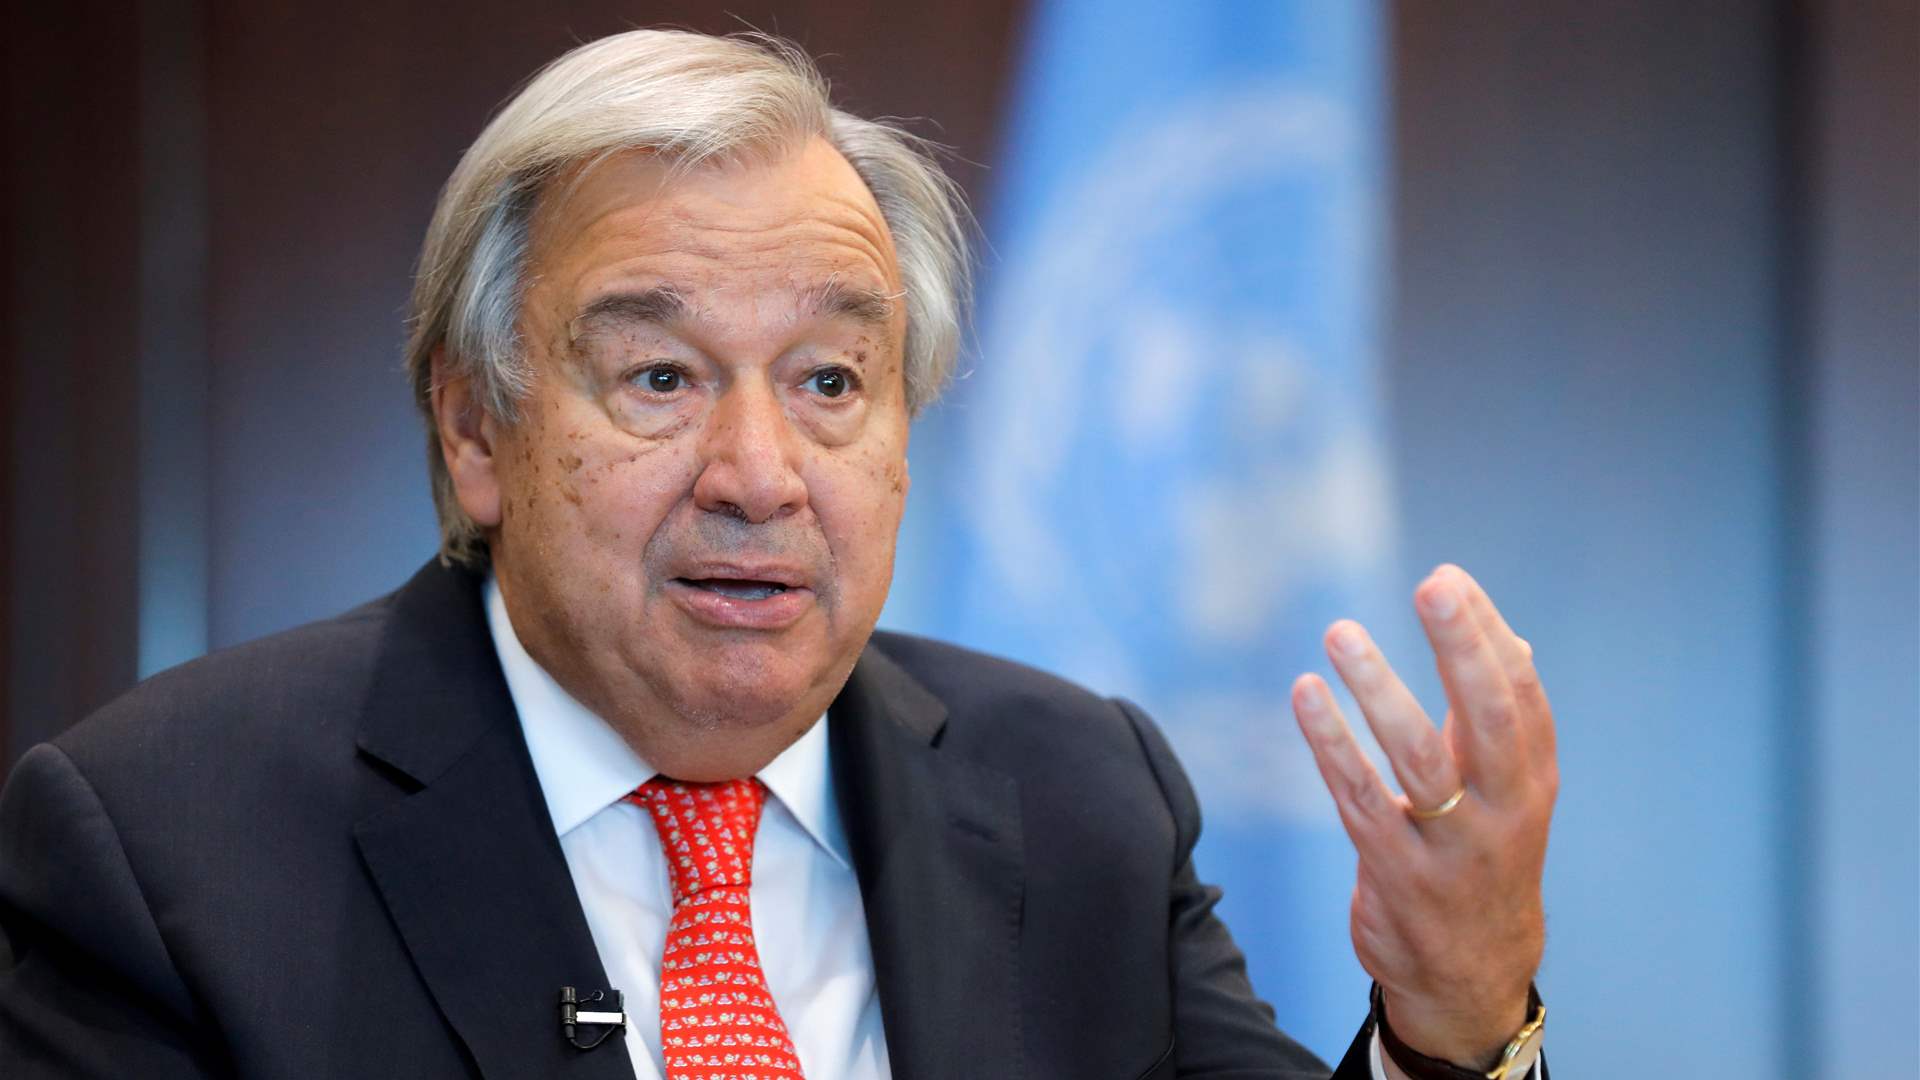 Guterres says era of fossil fuels must end